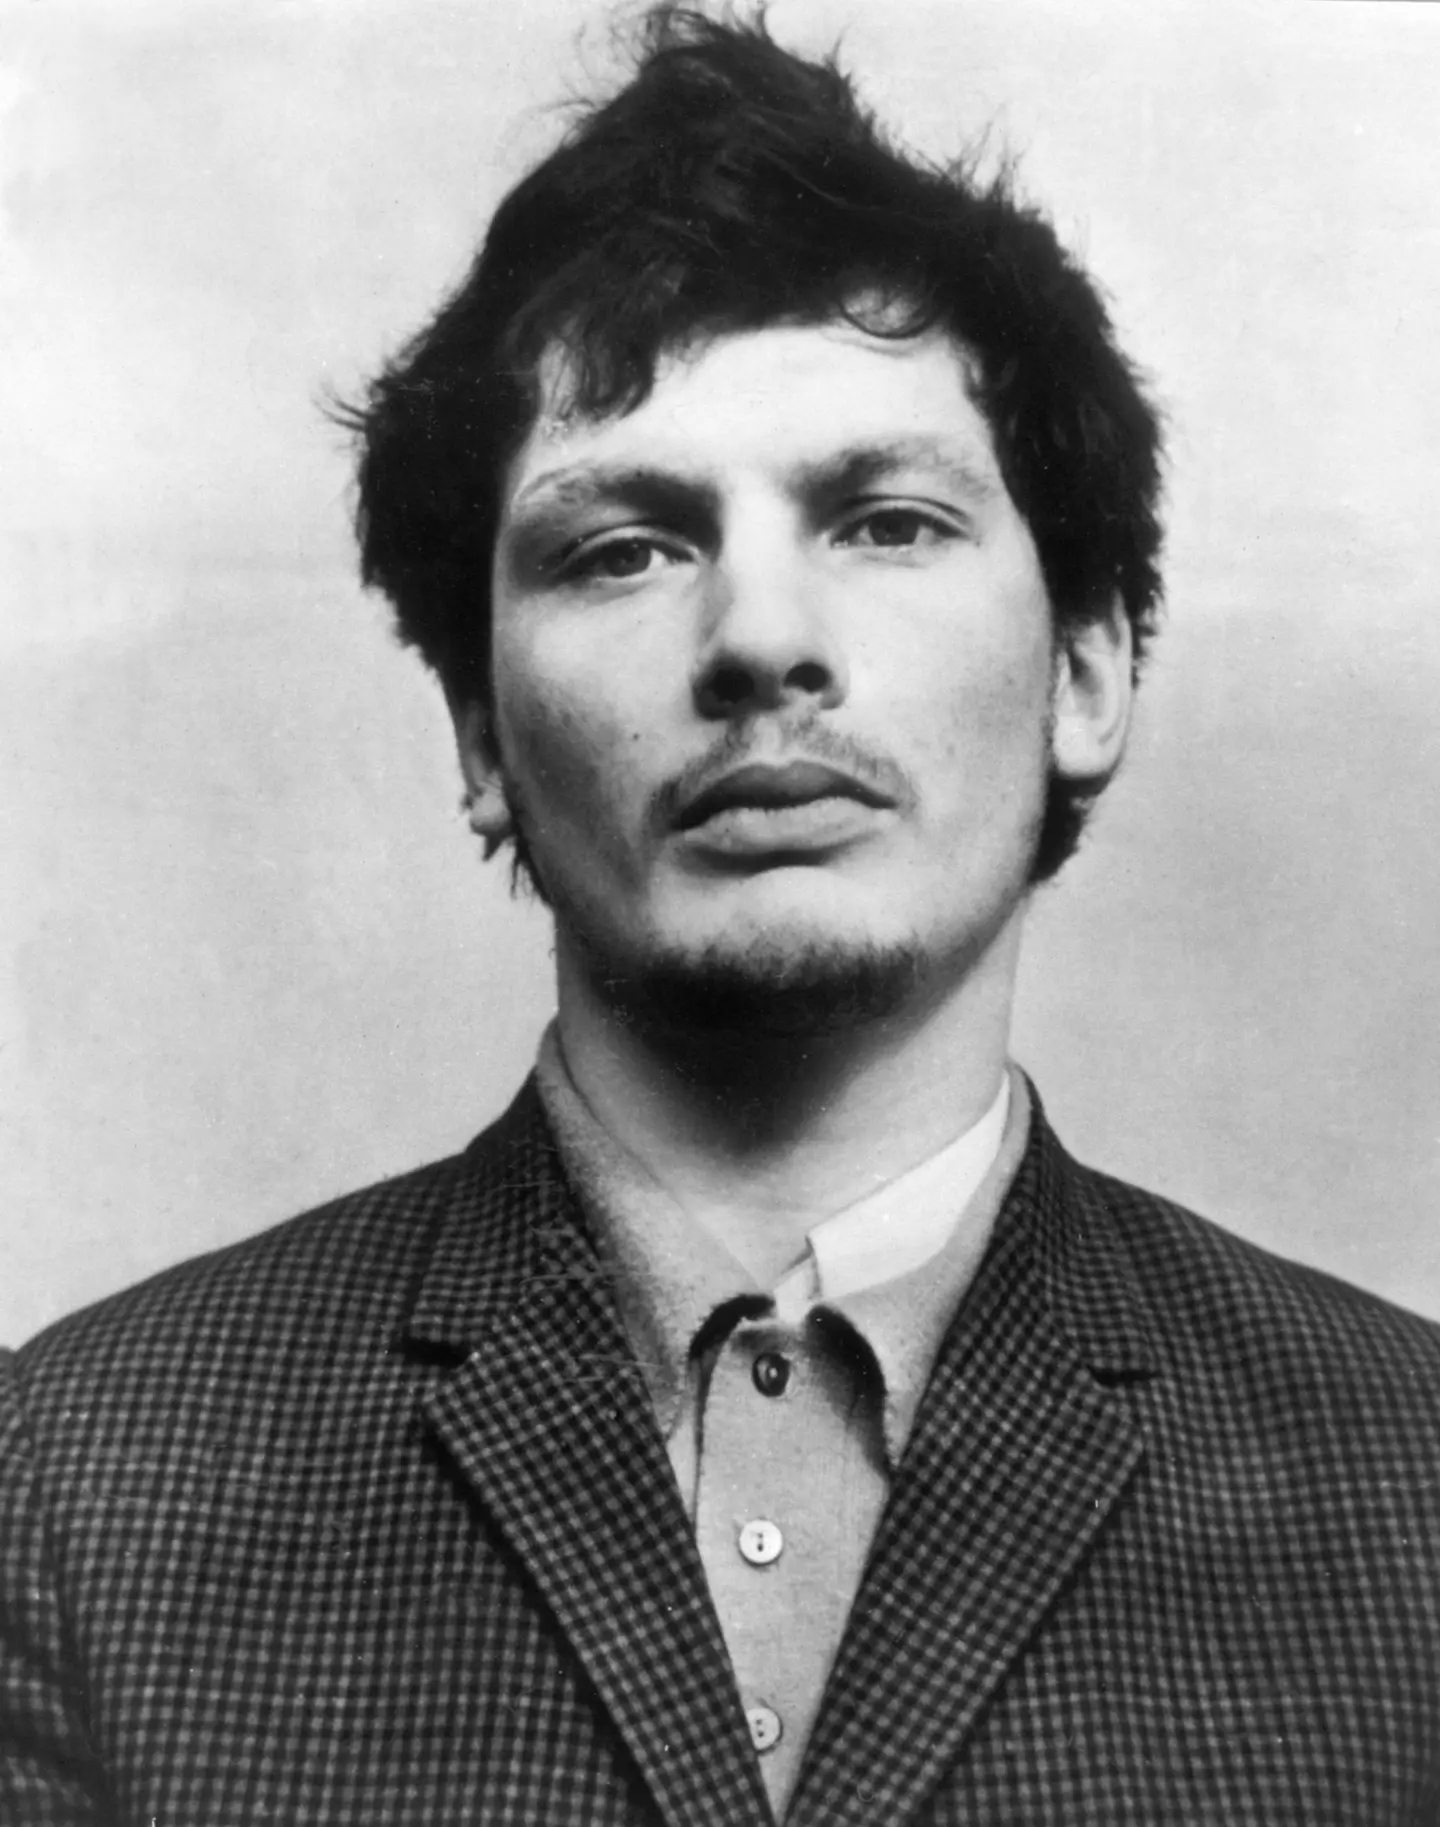 Patrick Mackay was sentenced to life imprisonment in 1975.